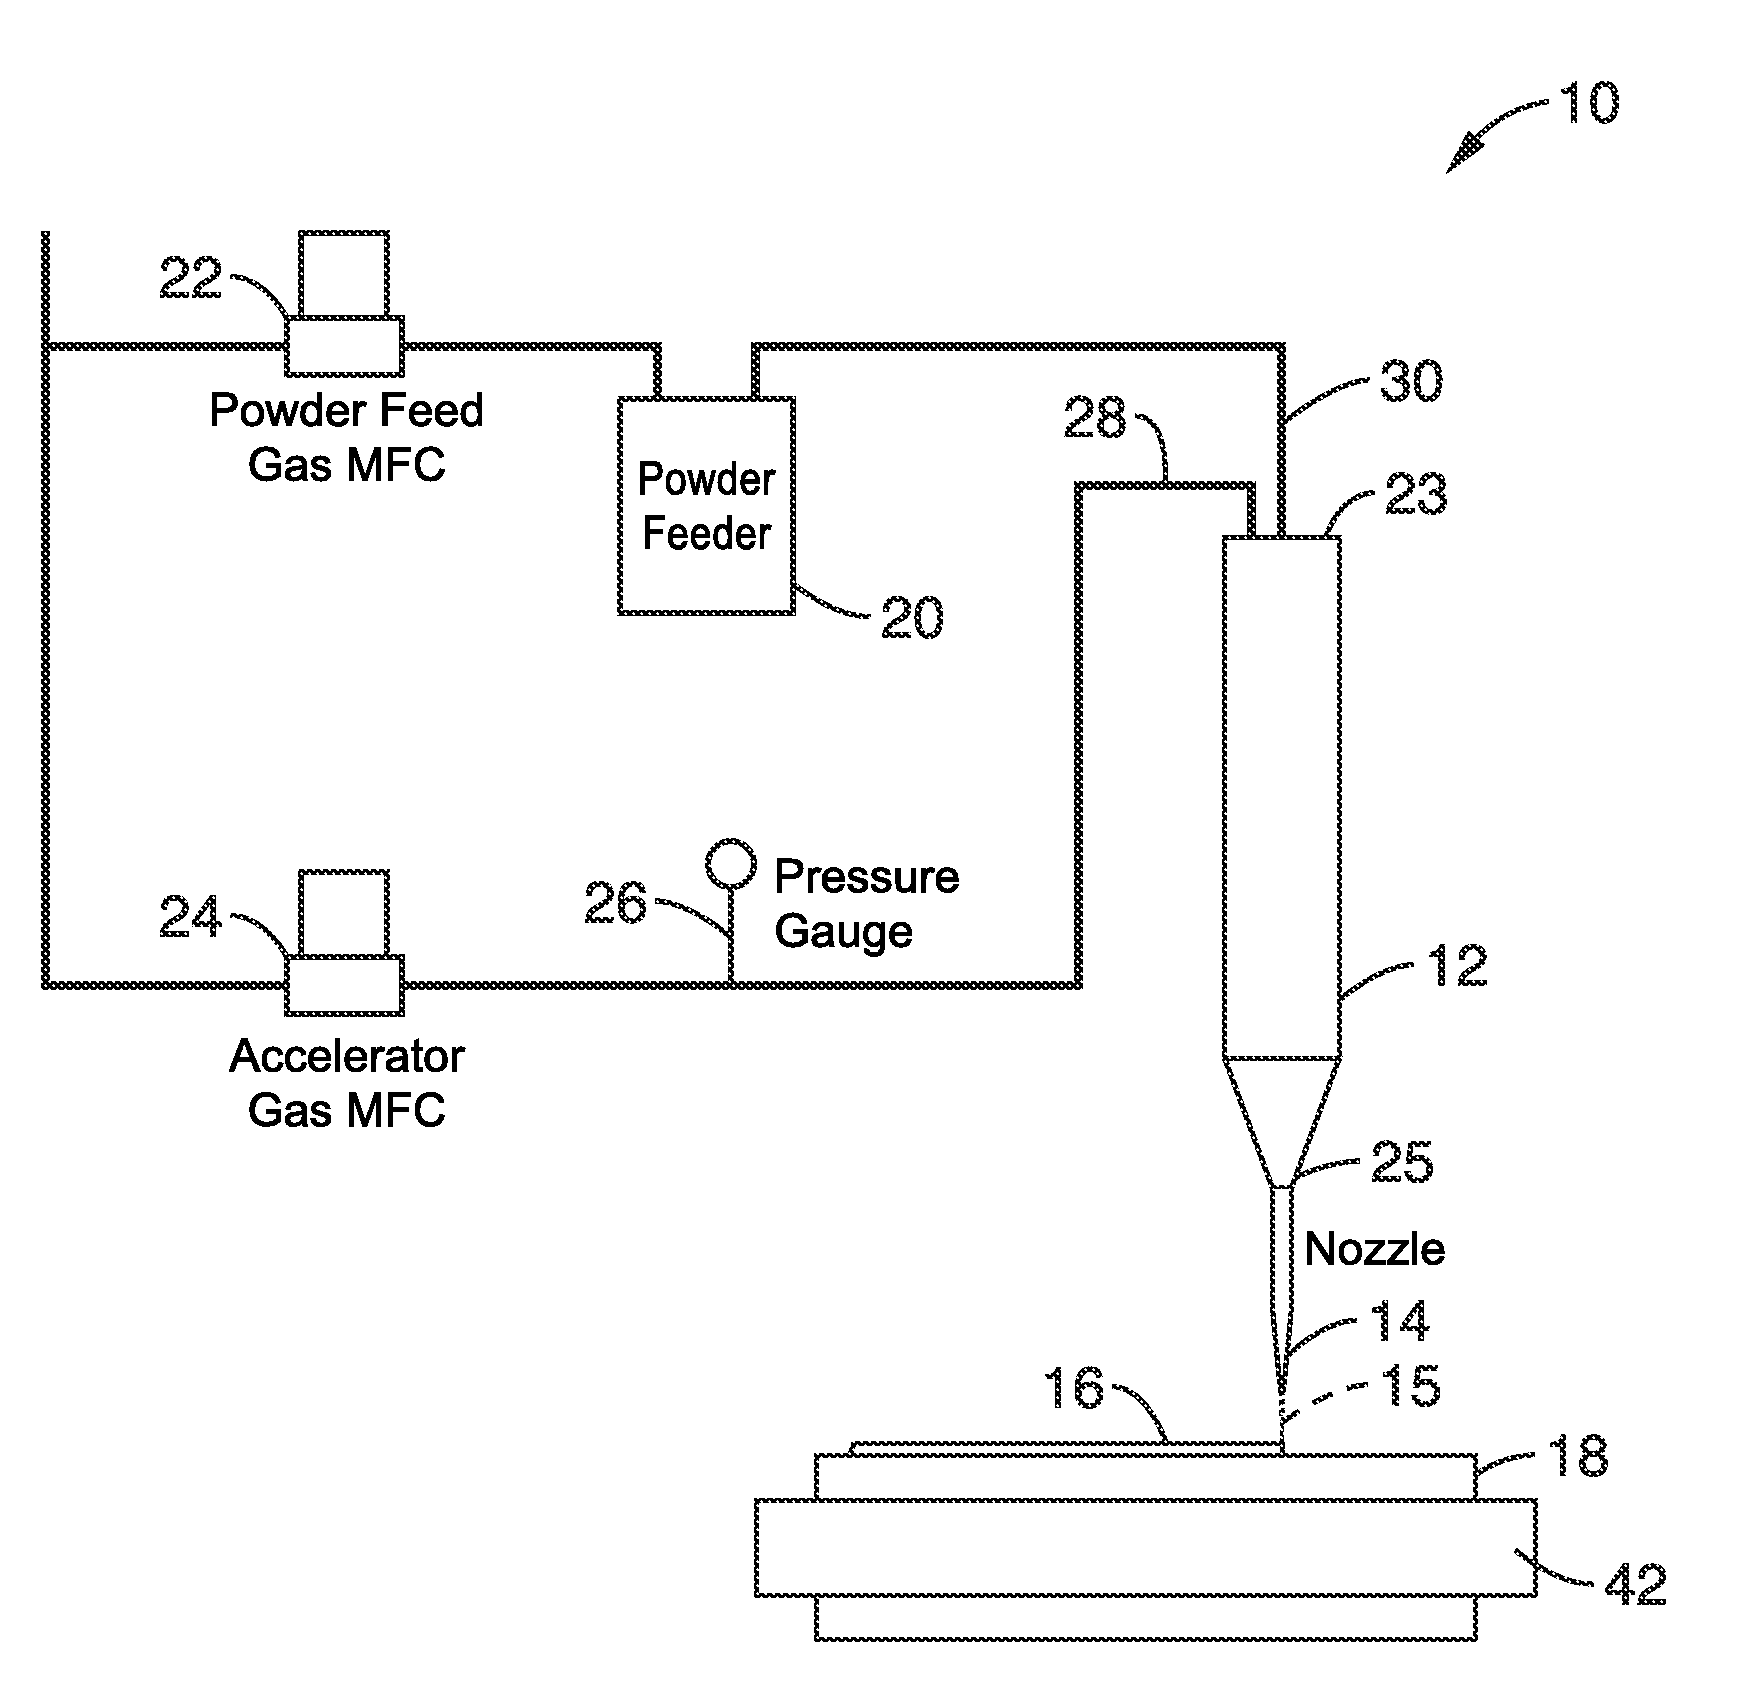 Micro cold spray direct write systems and methods for printed micro electronics